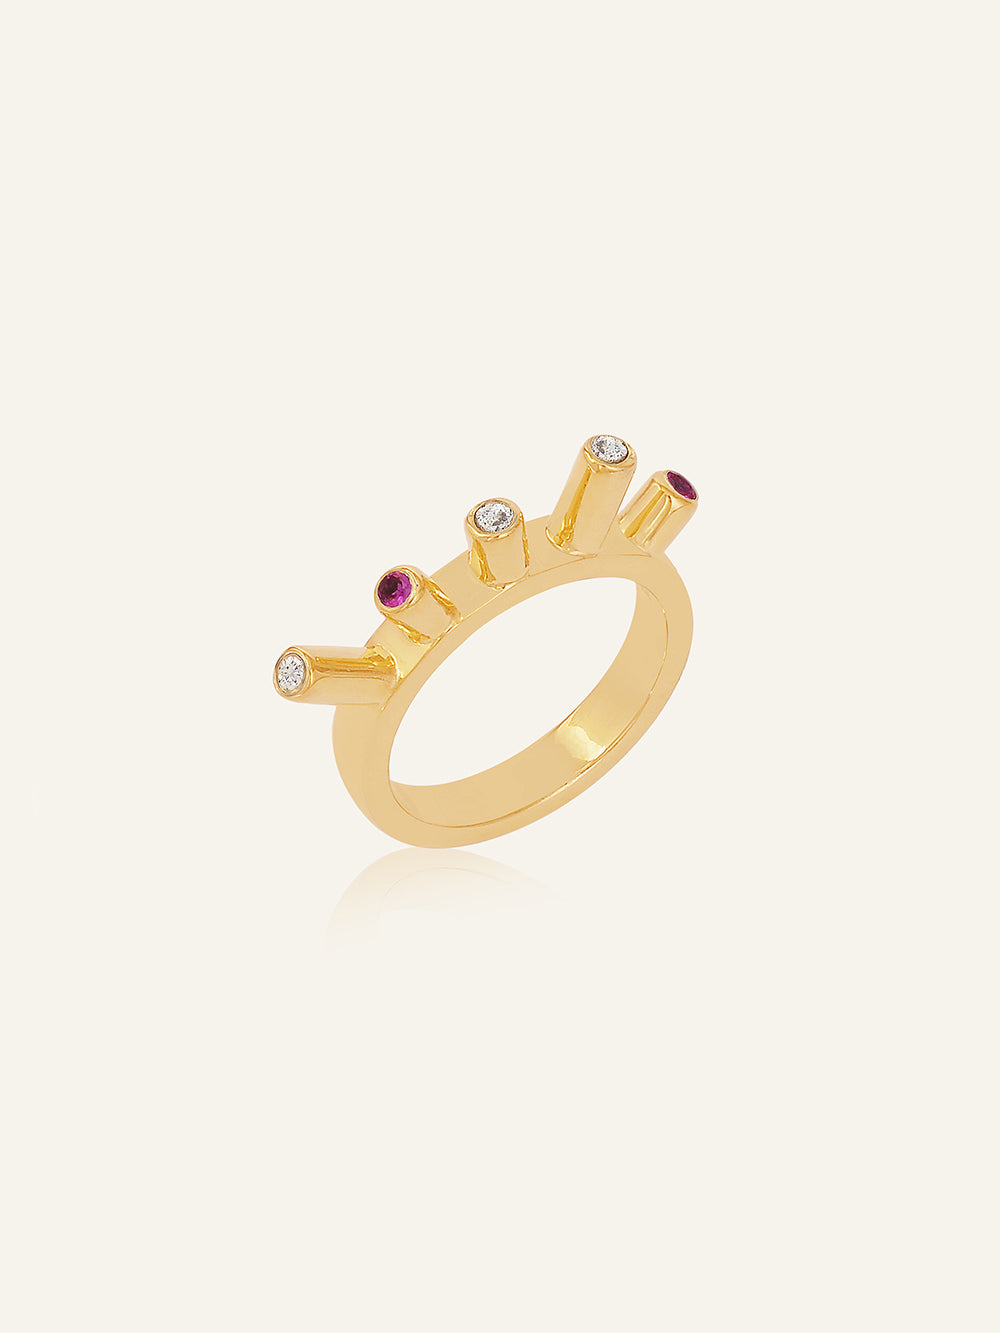 CORAL RING YELLOW GOLL